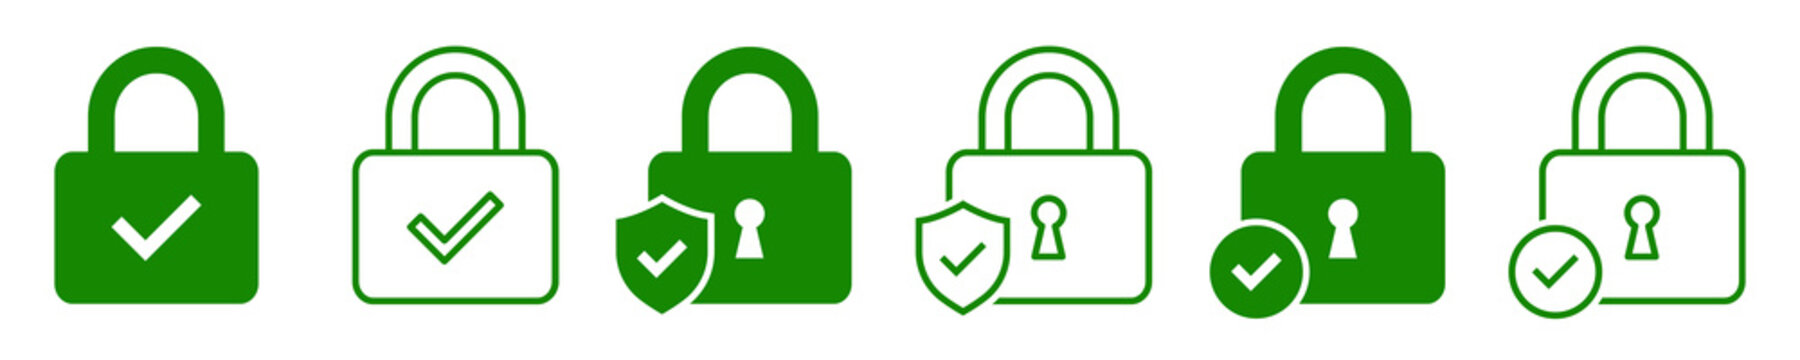 Set of security lock icons. Circle and shield with lock icon with check mark. Security lock, cyber defence. Vector illustration.